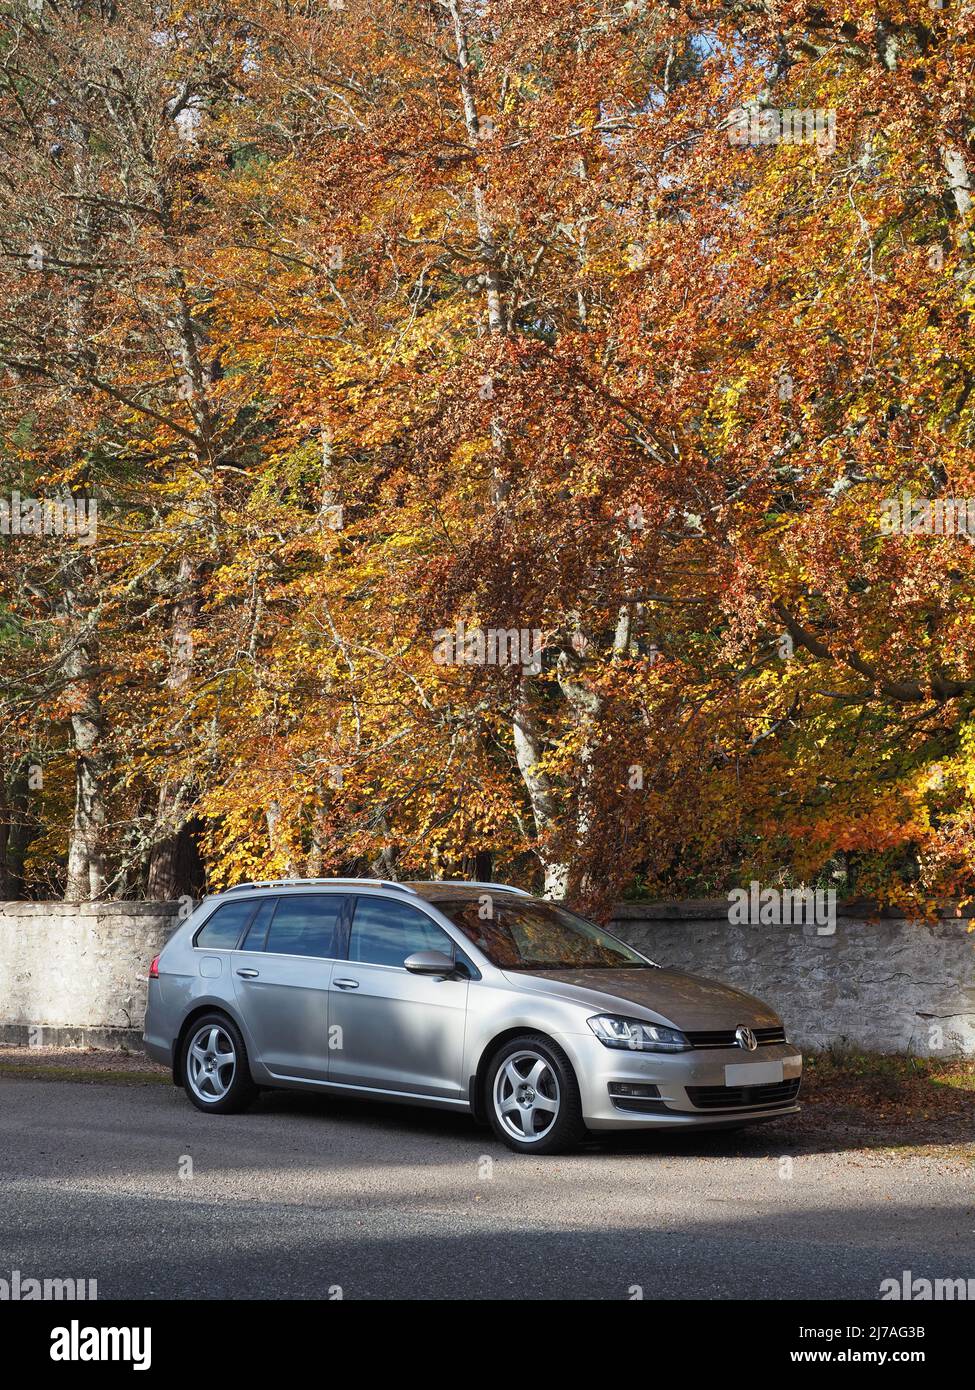 Tungsten silver Volkswagen Golf MK7 estate, variant. Parked in front of tall trees with leaves in full autumnal colours & an old stone wall Stock Photo